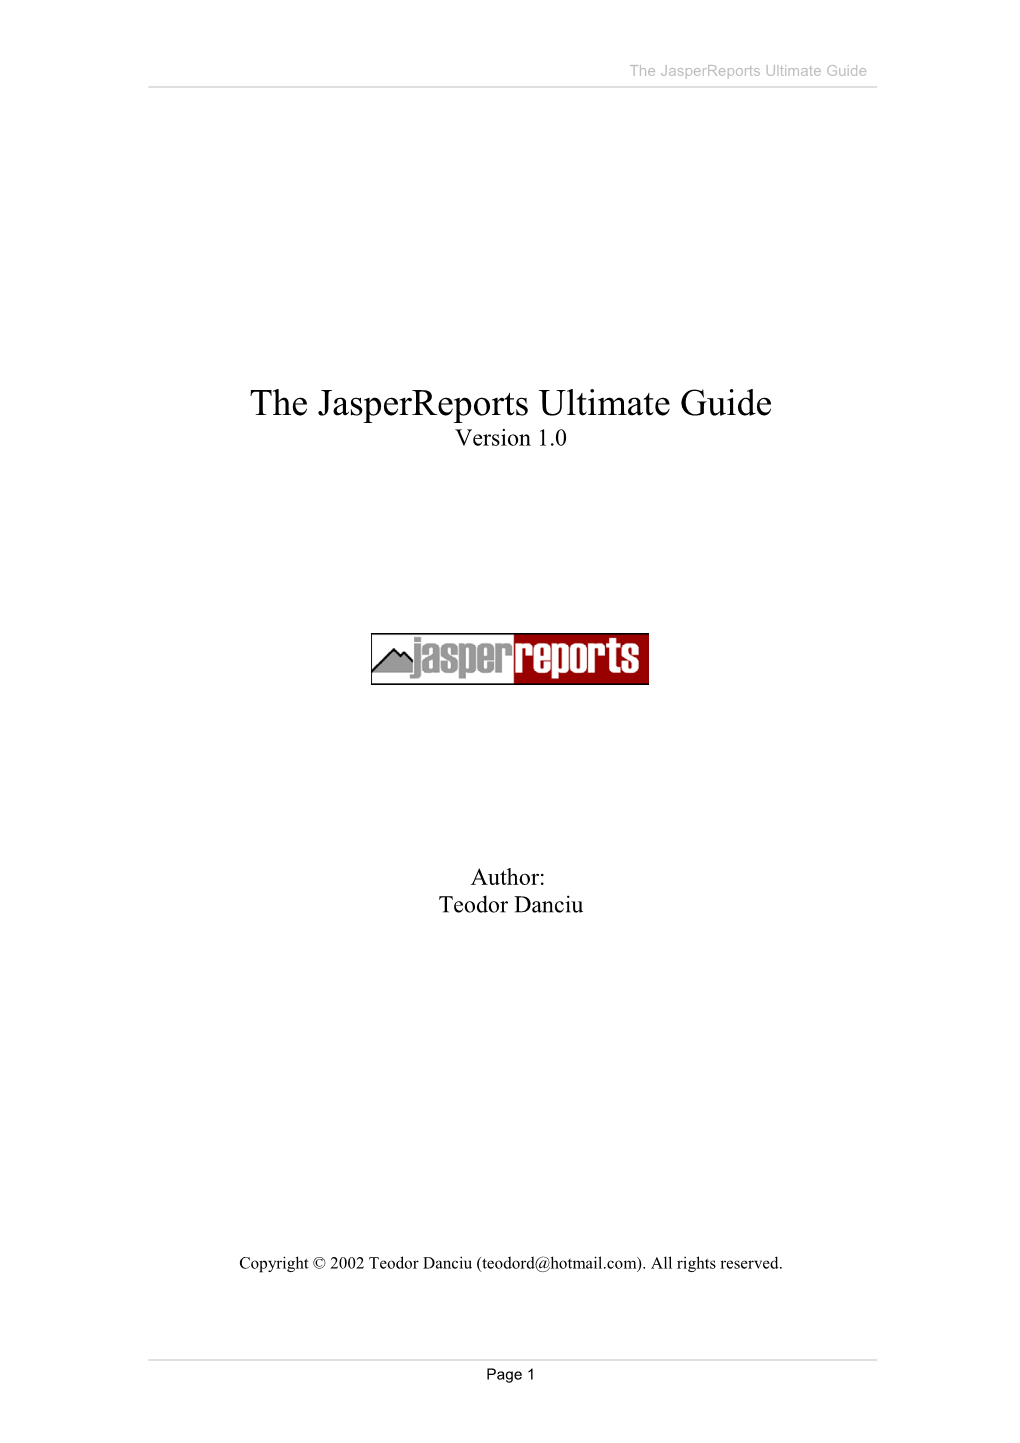 The Jasperreports Ultimate Guide